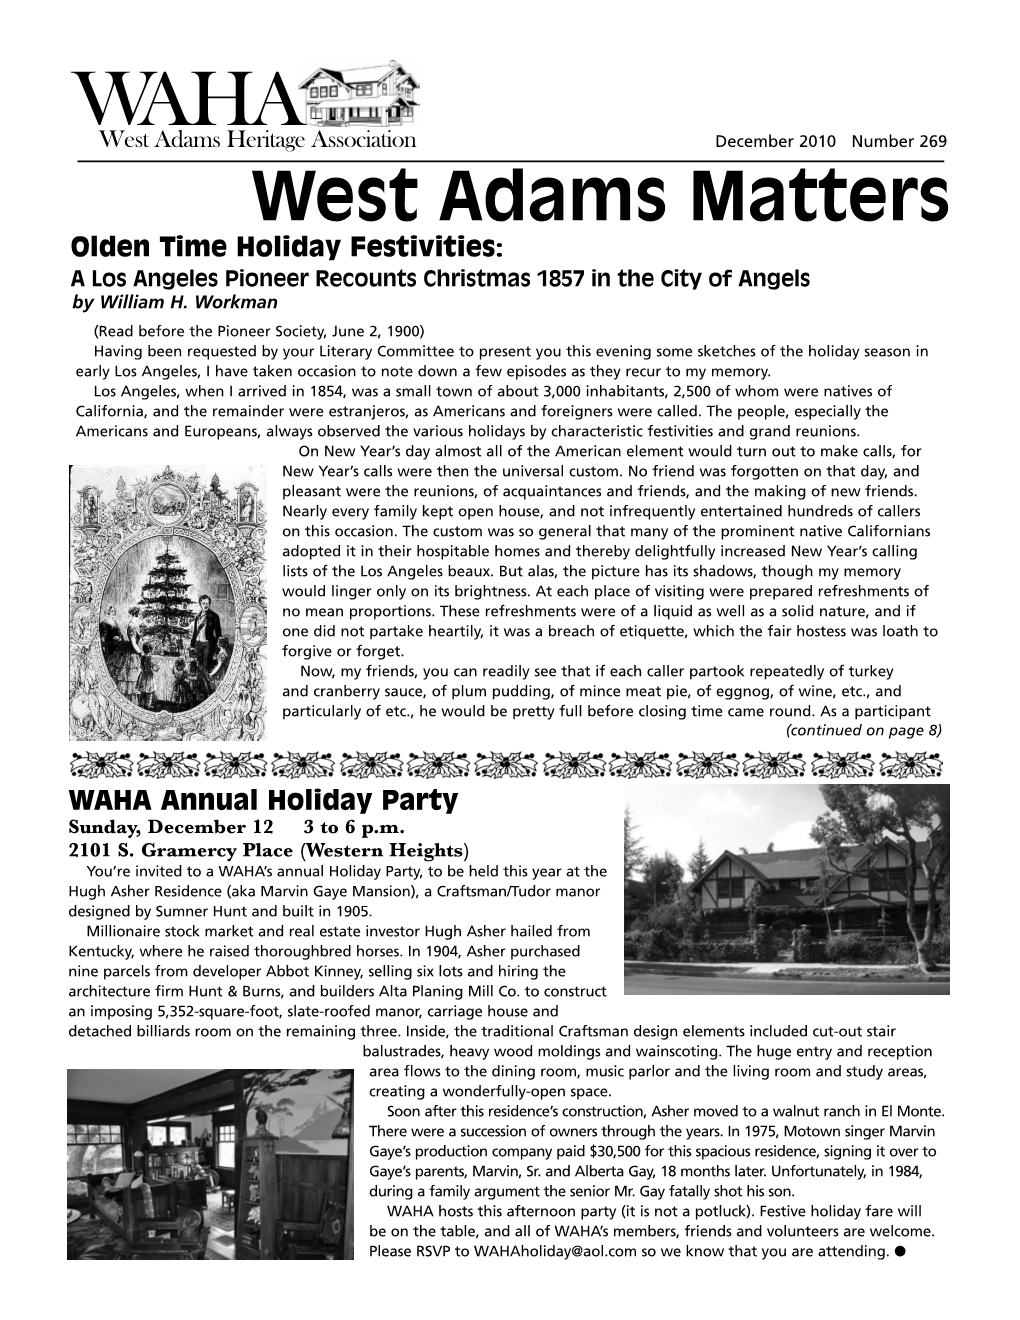 West Adams Matters Olden Time Holiday Festivities: a Los Angeles Pioneer Recounts Christmas 1857 in the City of Angels by William H